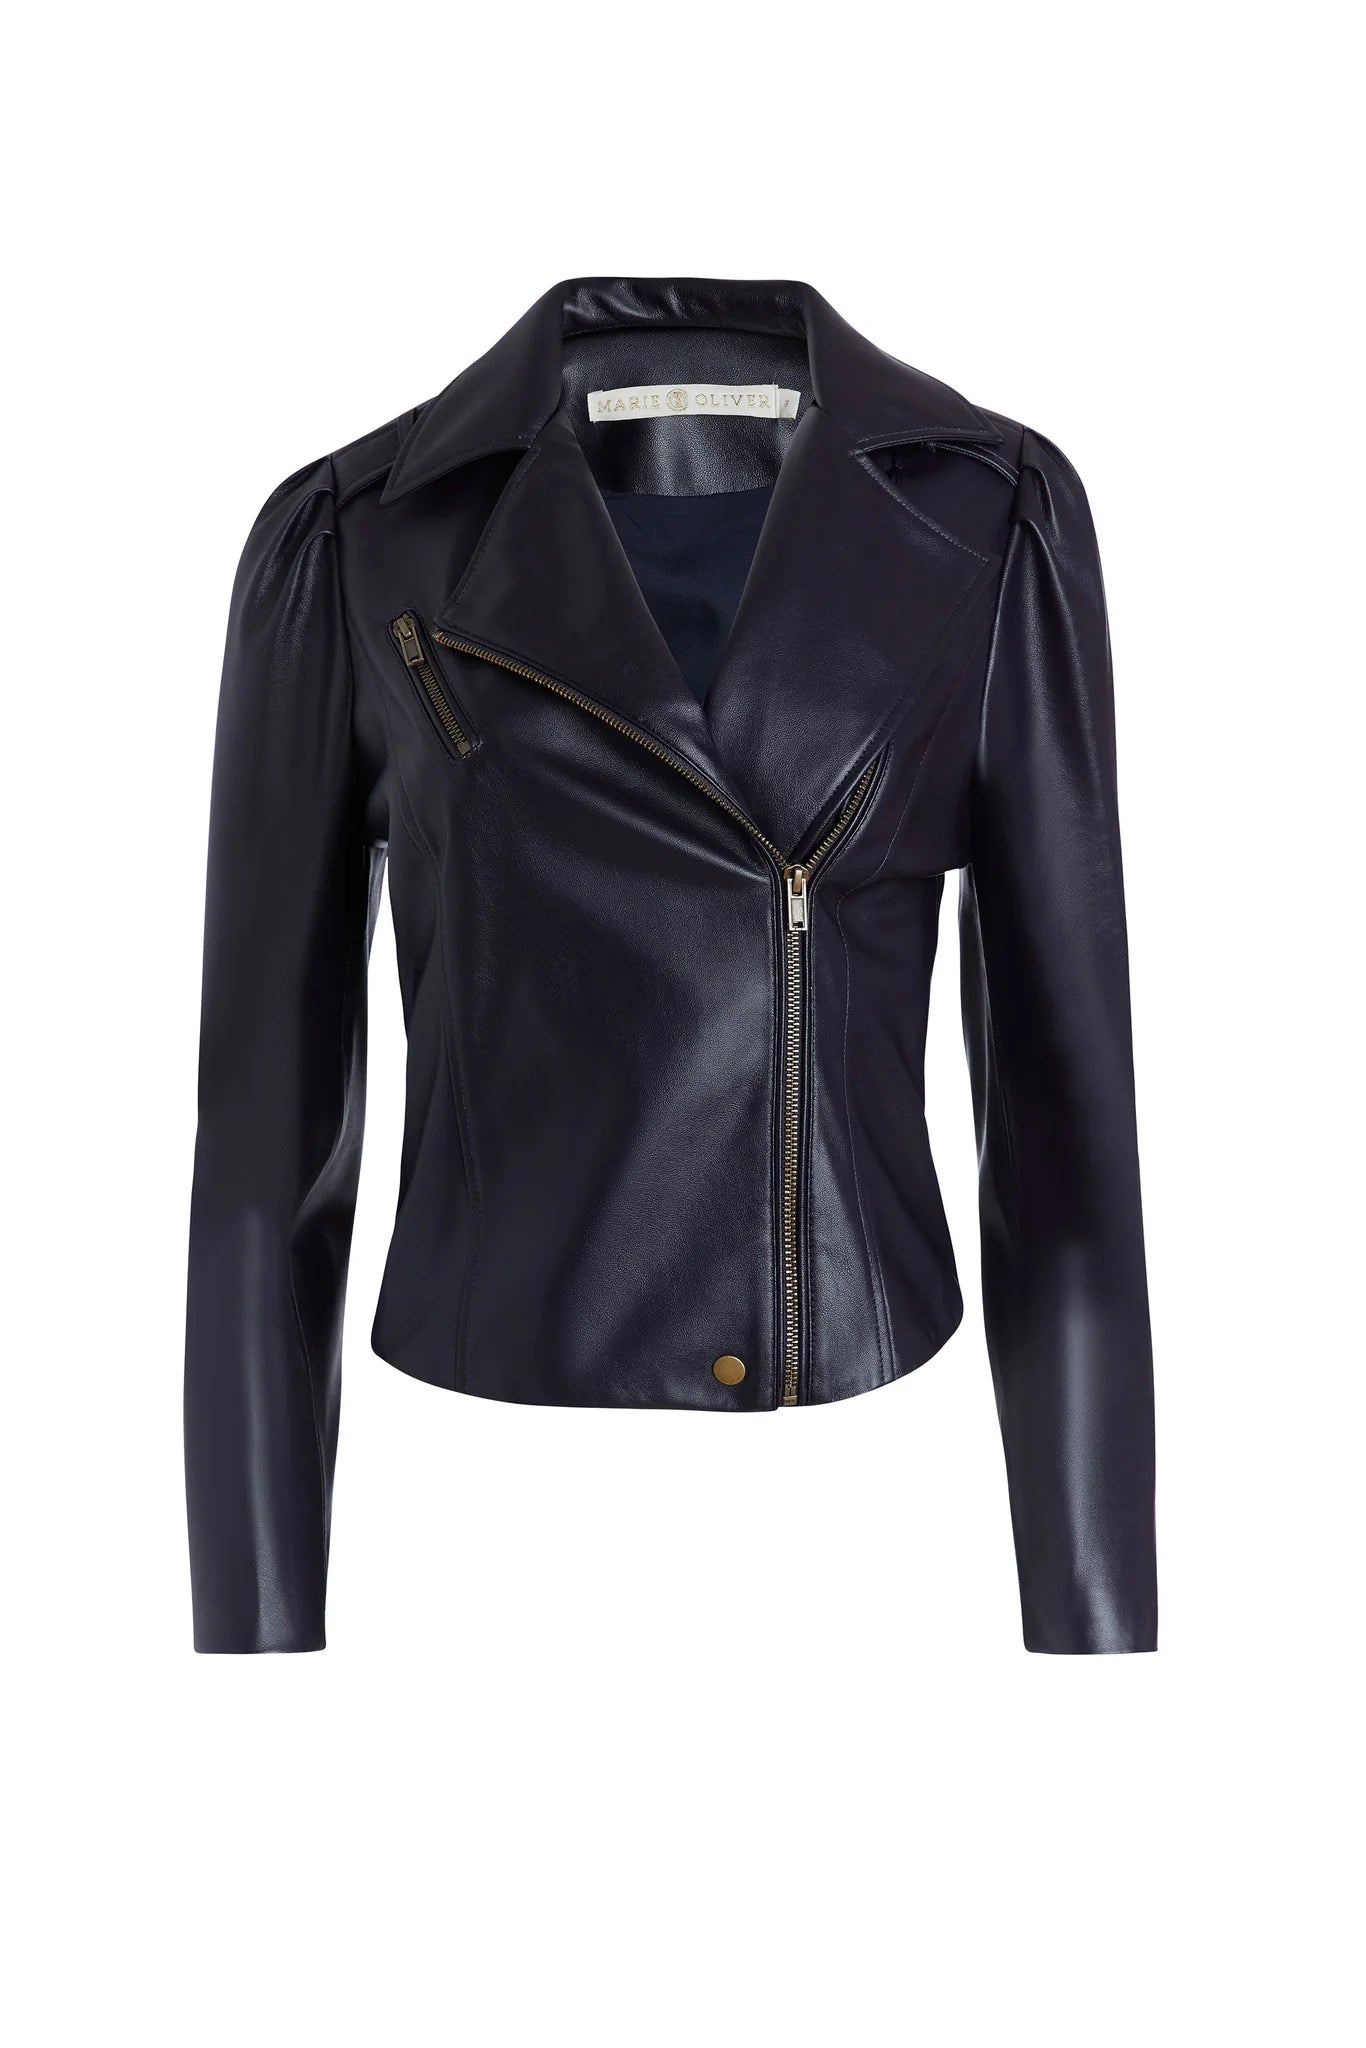 Maeve Moto Jacket by Marie Oliver in Midnight